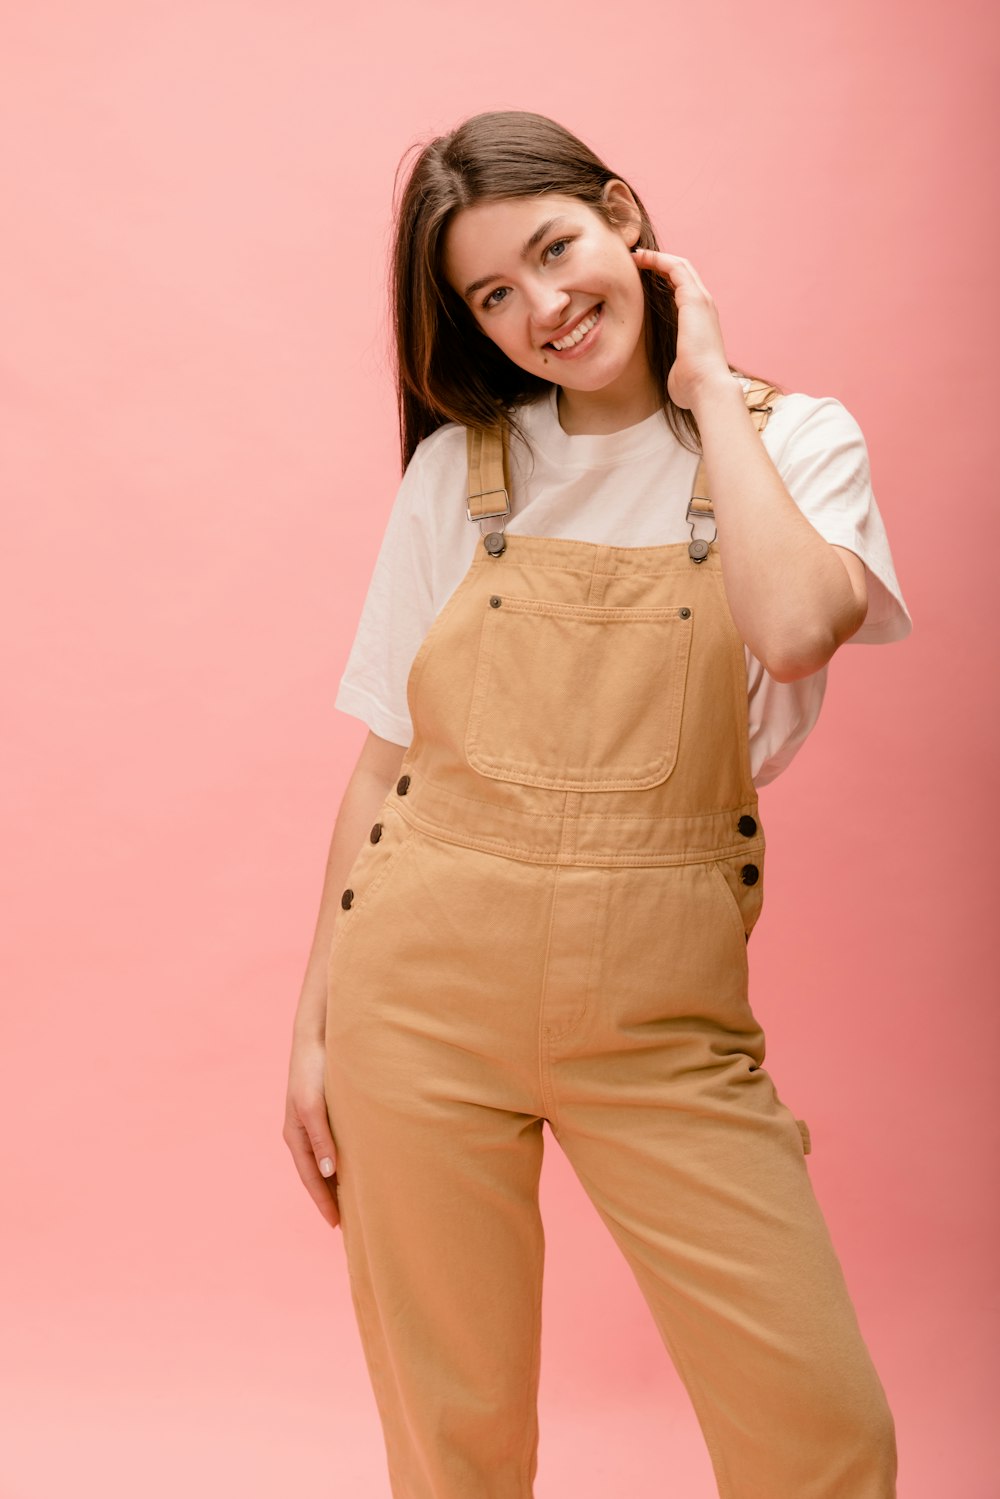 a woman in overalls posing for a picture